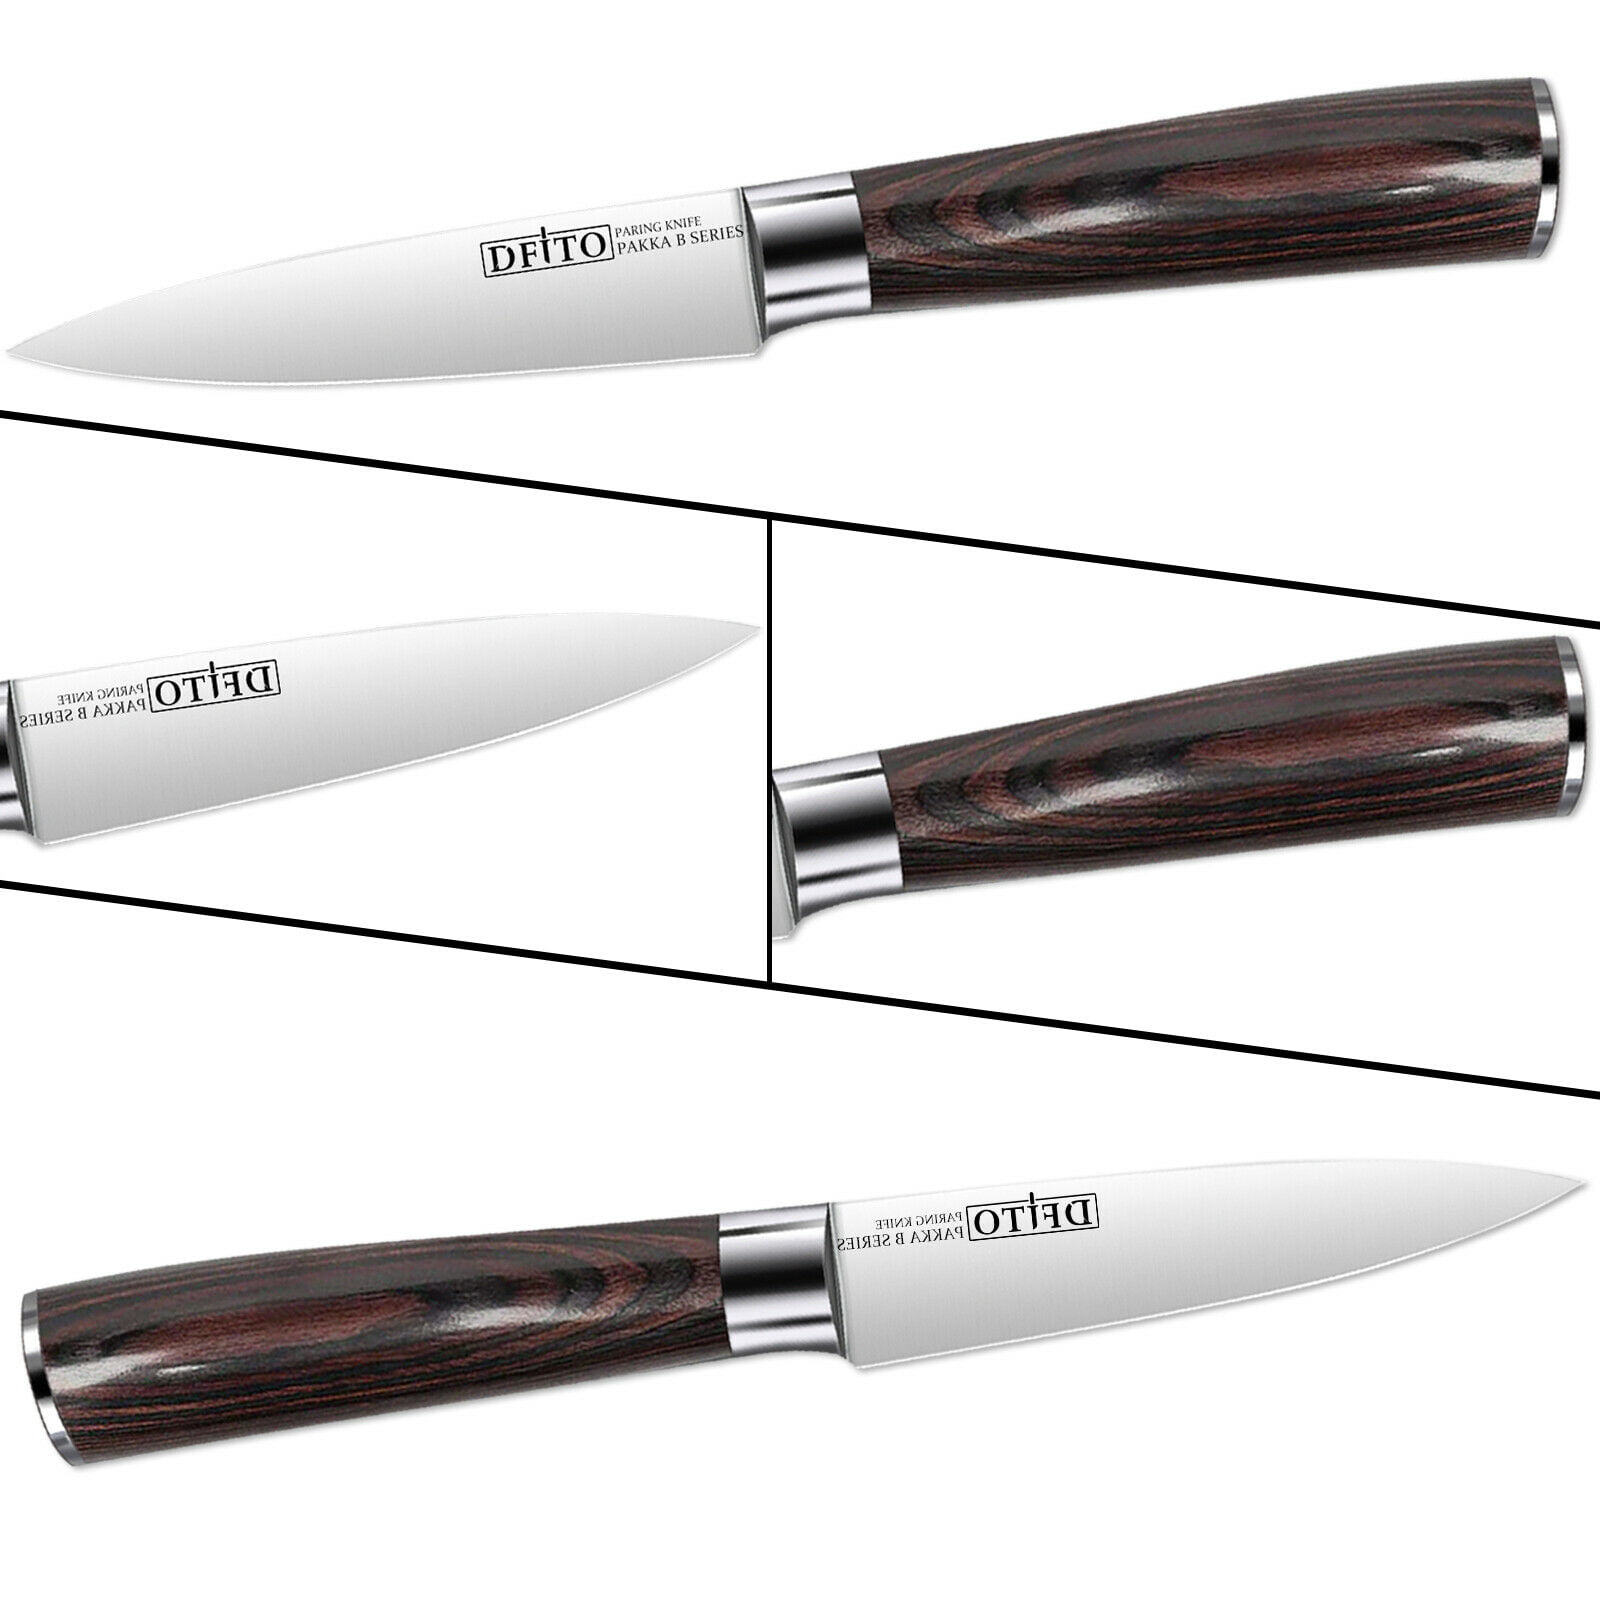 Paring Knife - PAUDIN 3.5 Inch Kitchen Knife N8 German High Carbon  Stainless Steel Knife, Fruit and Vegetable Cutting Chopping Carving Knives  